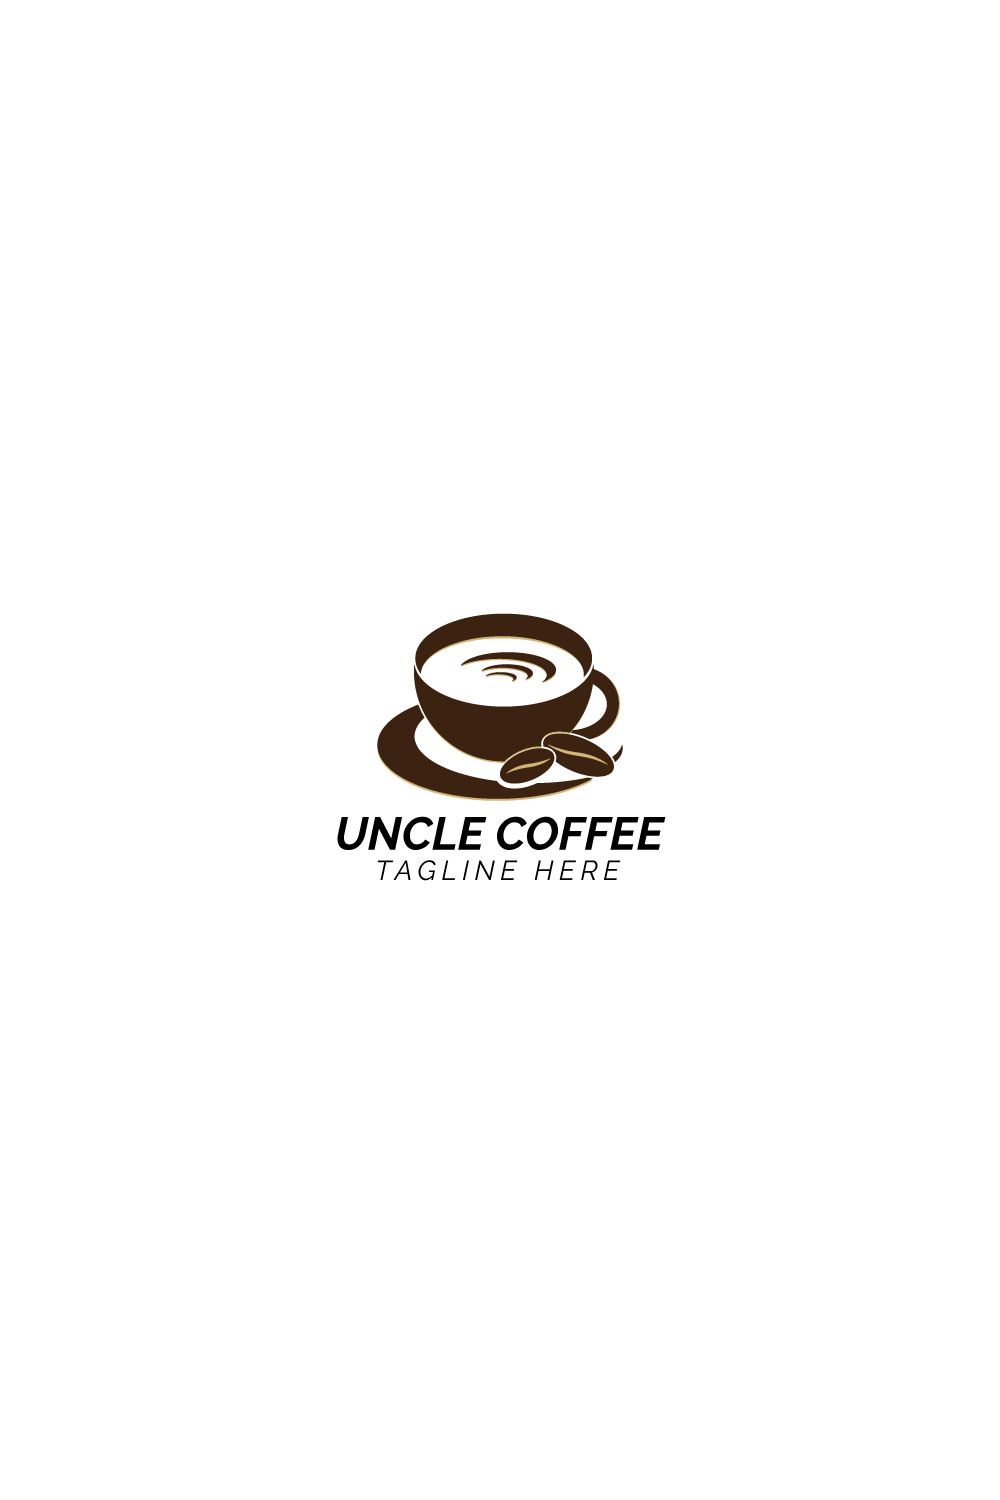 Uncle Coffee cup and coffee beans logo pinterest preview image.